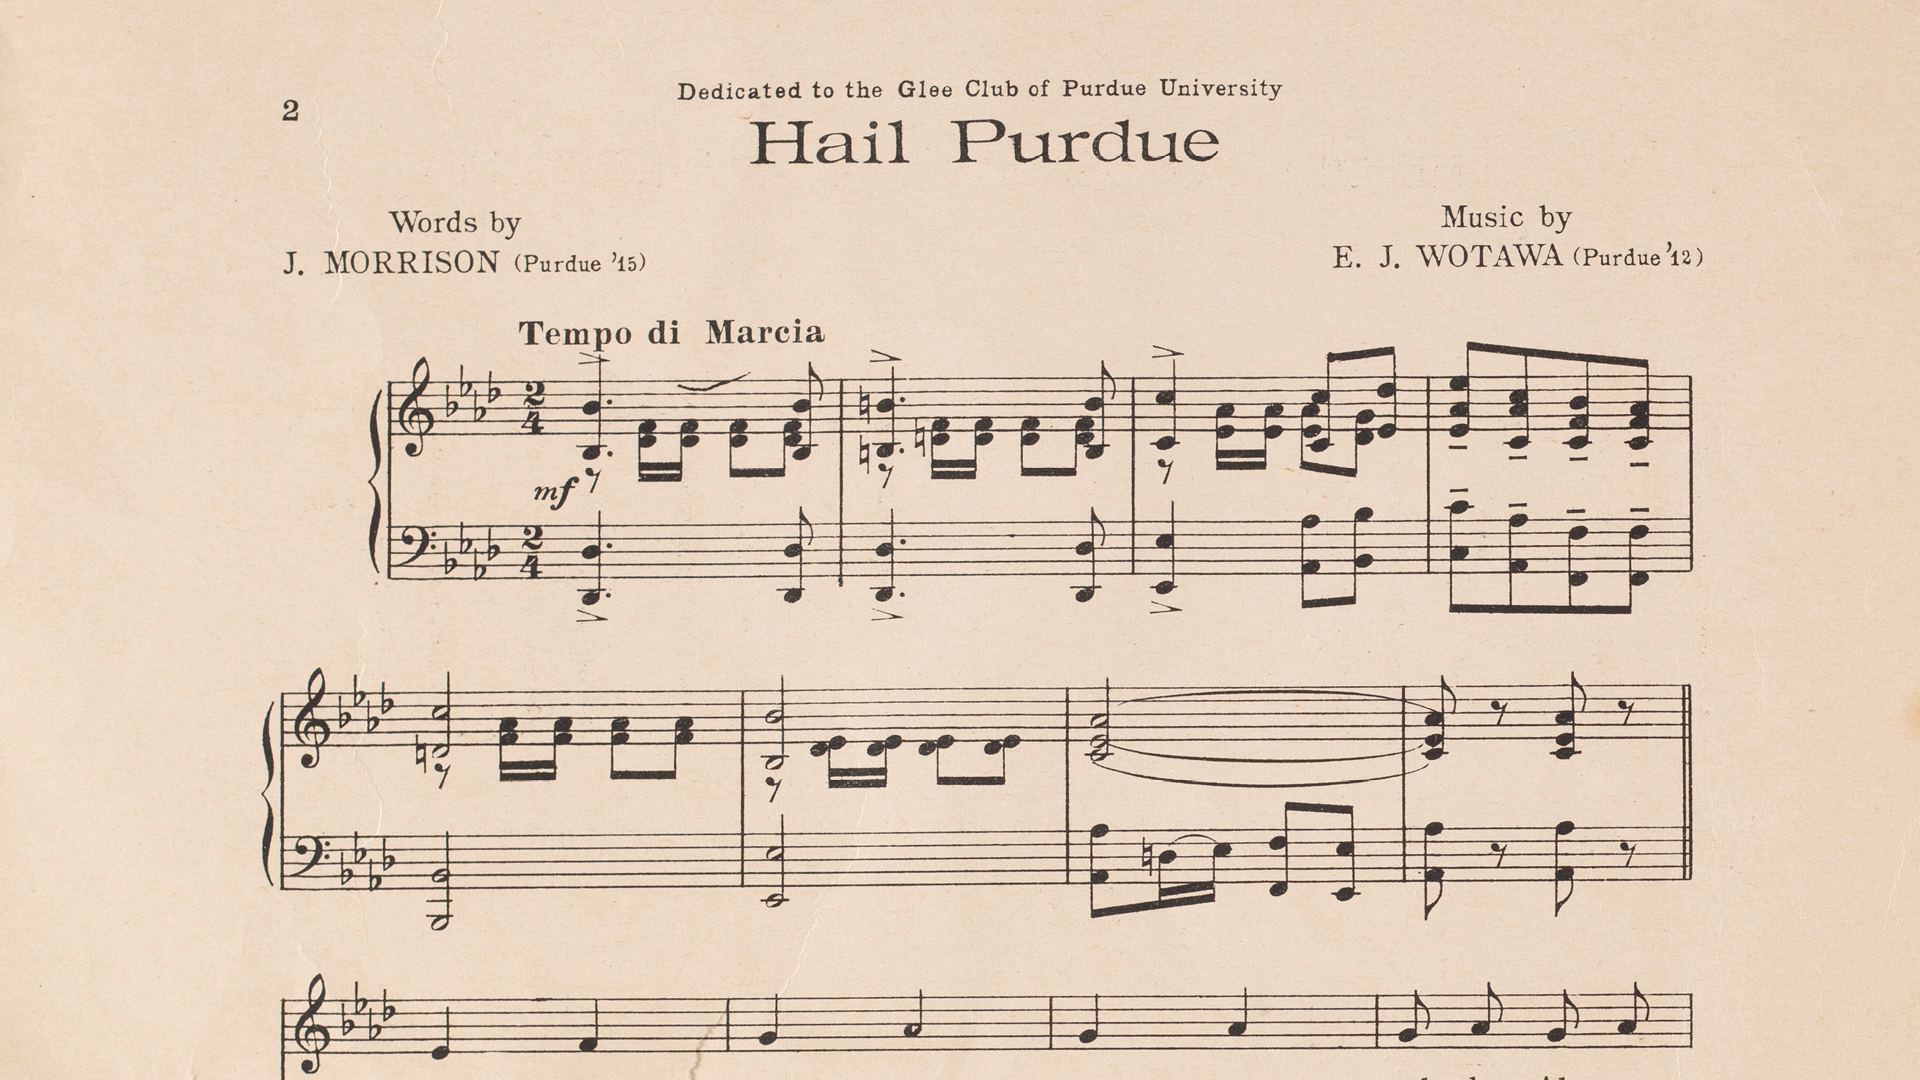 An original copy of ‘Hail Purdue’ donated to the University by the songwriters.